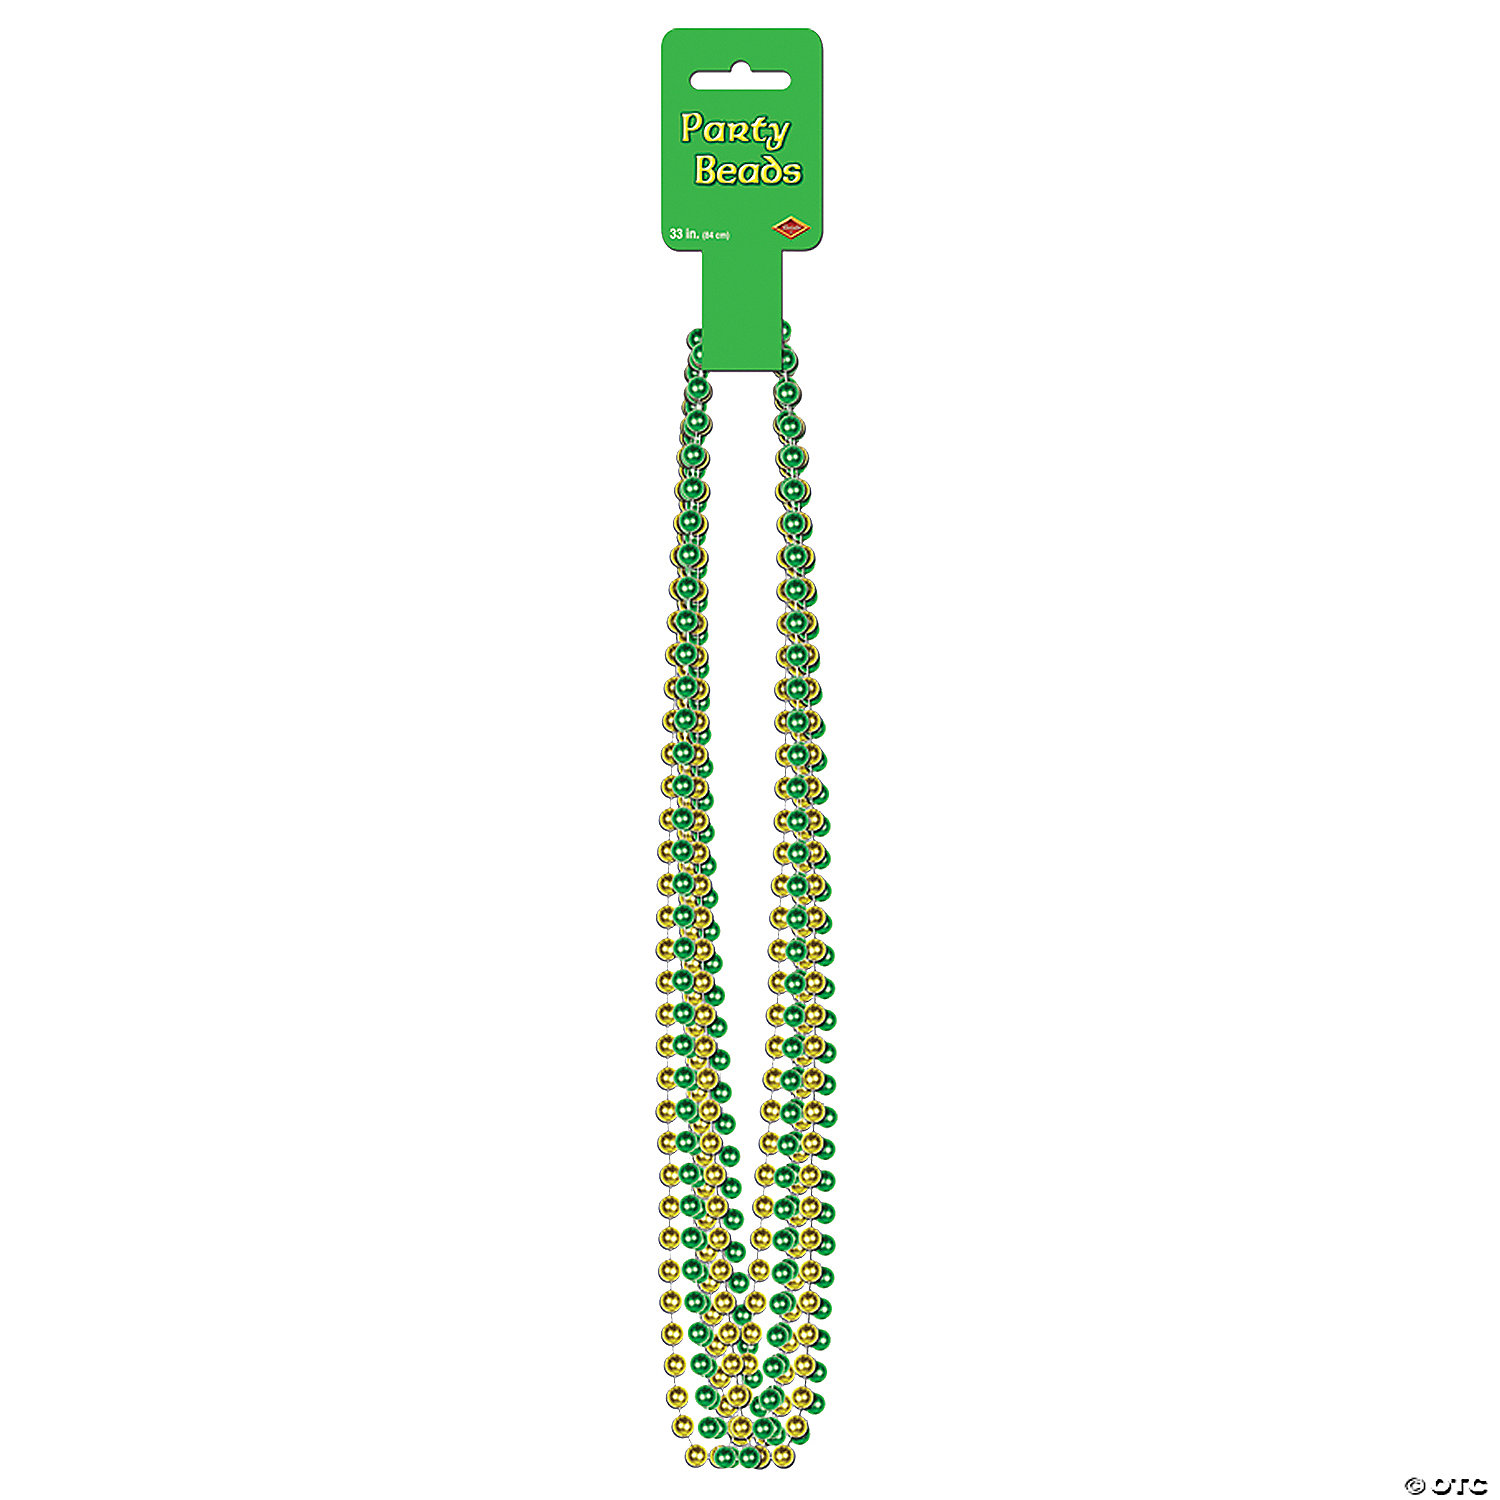 ROUND PARTY BEADS - ST. PATRICK'S DAY